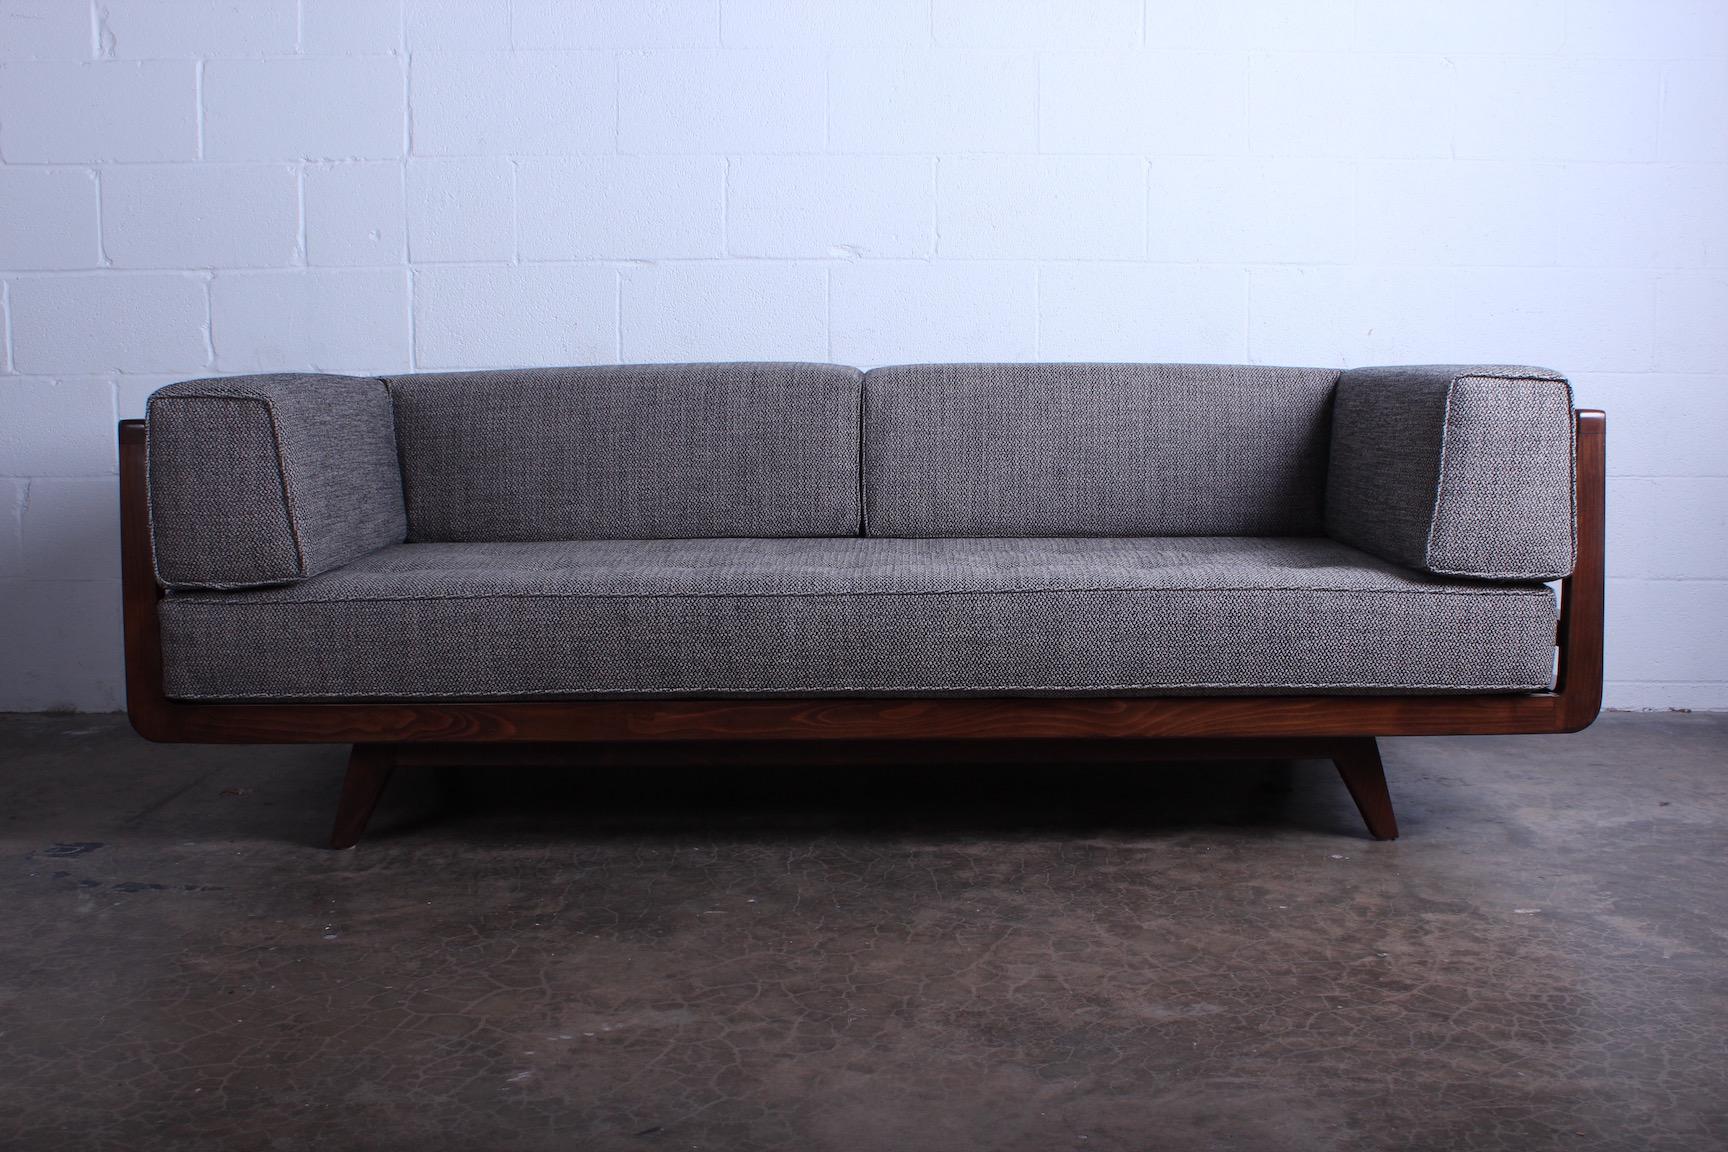 A rare Precedent sofa / daybed designed by Edward Wormey for Drexel.